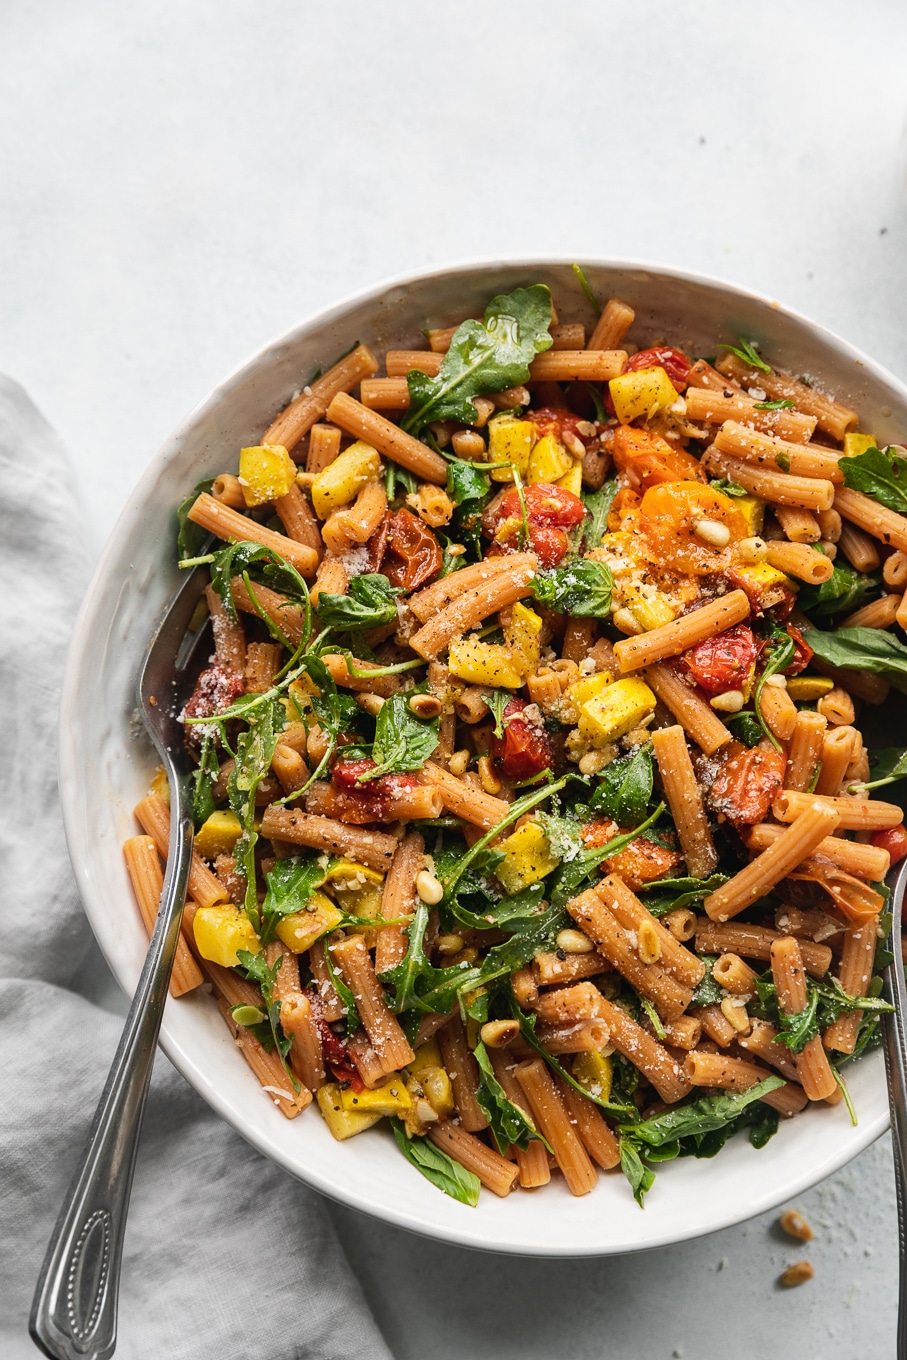 Garlic Roasted Tomato Red Lentil Pasta with Arugula and Toasted Pine Nuts